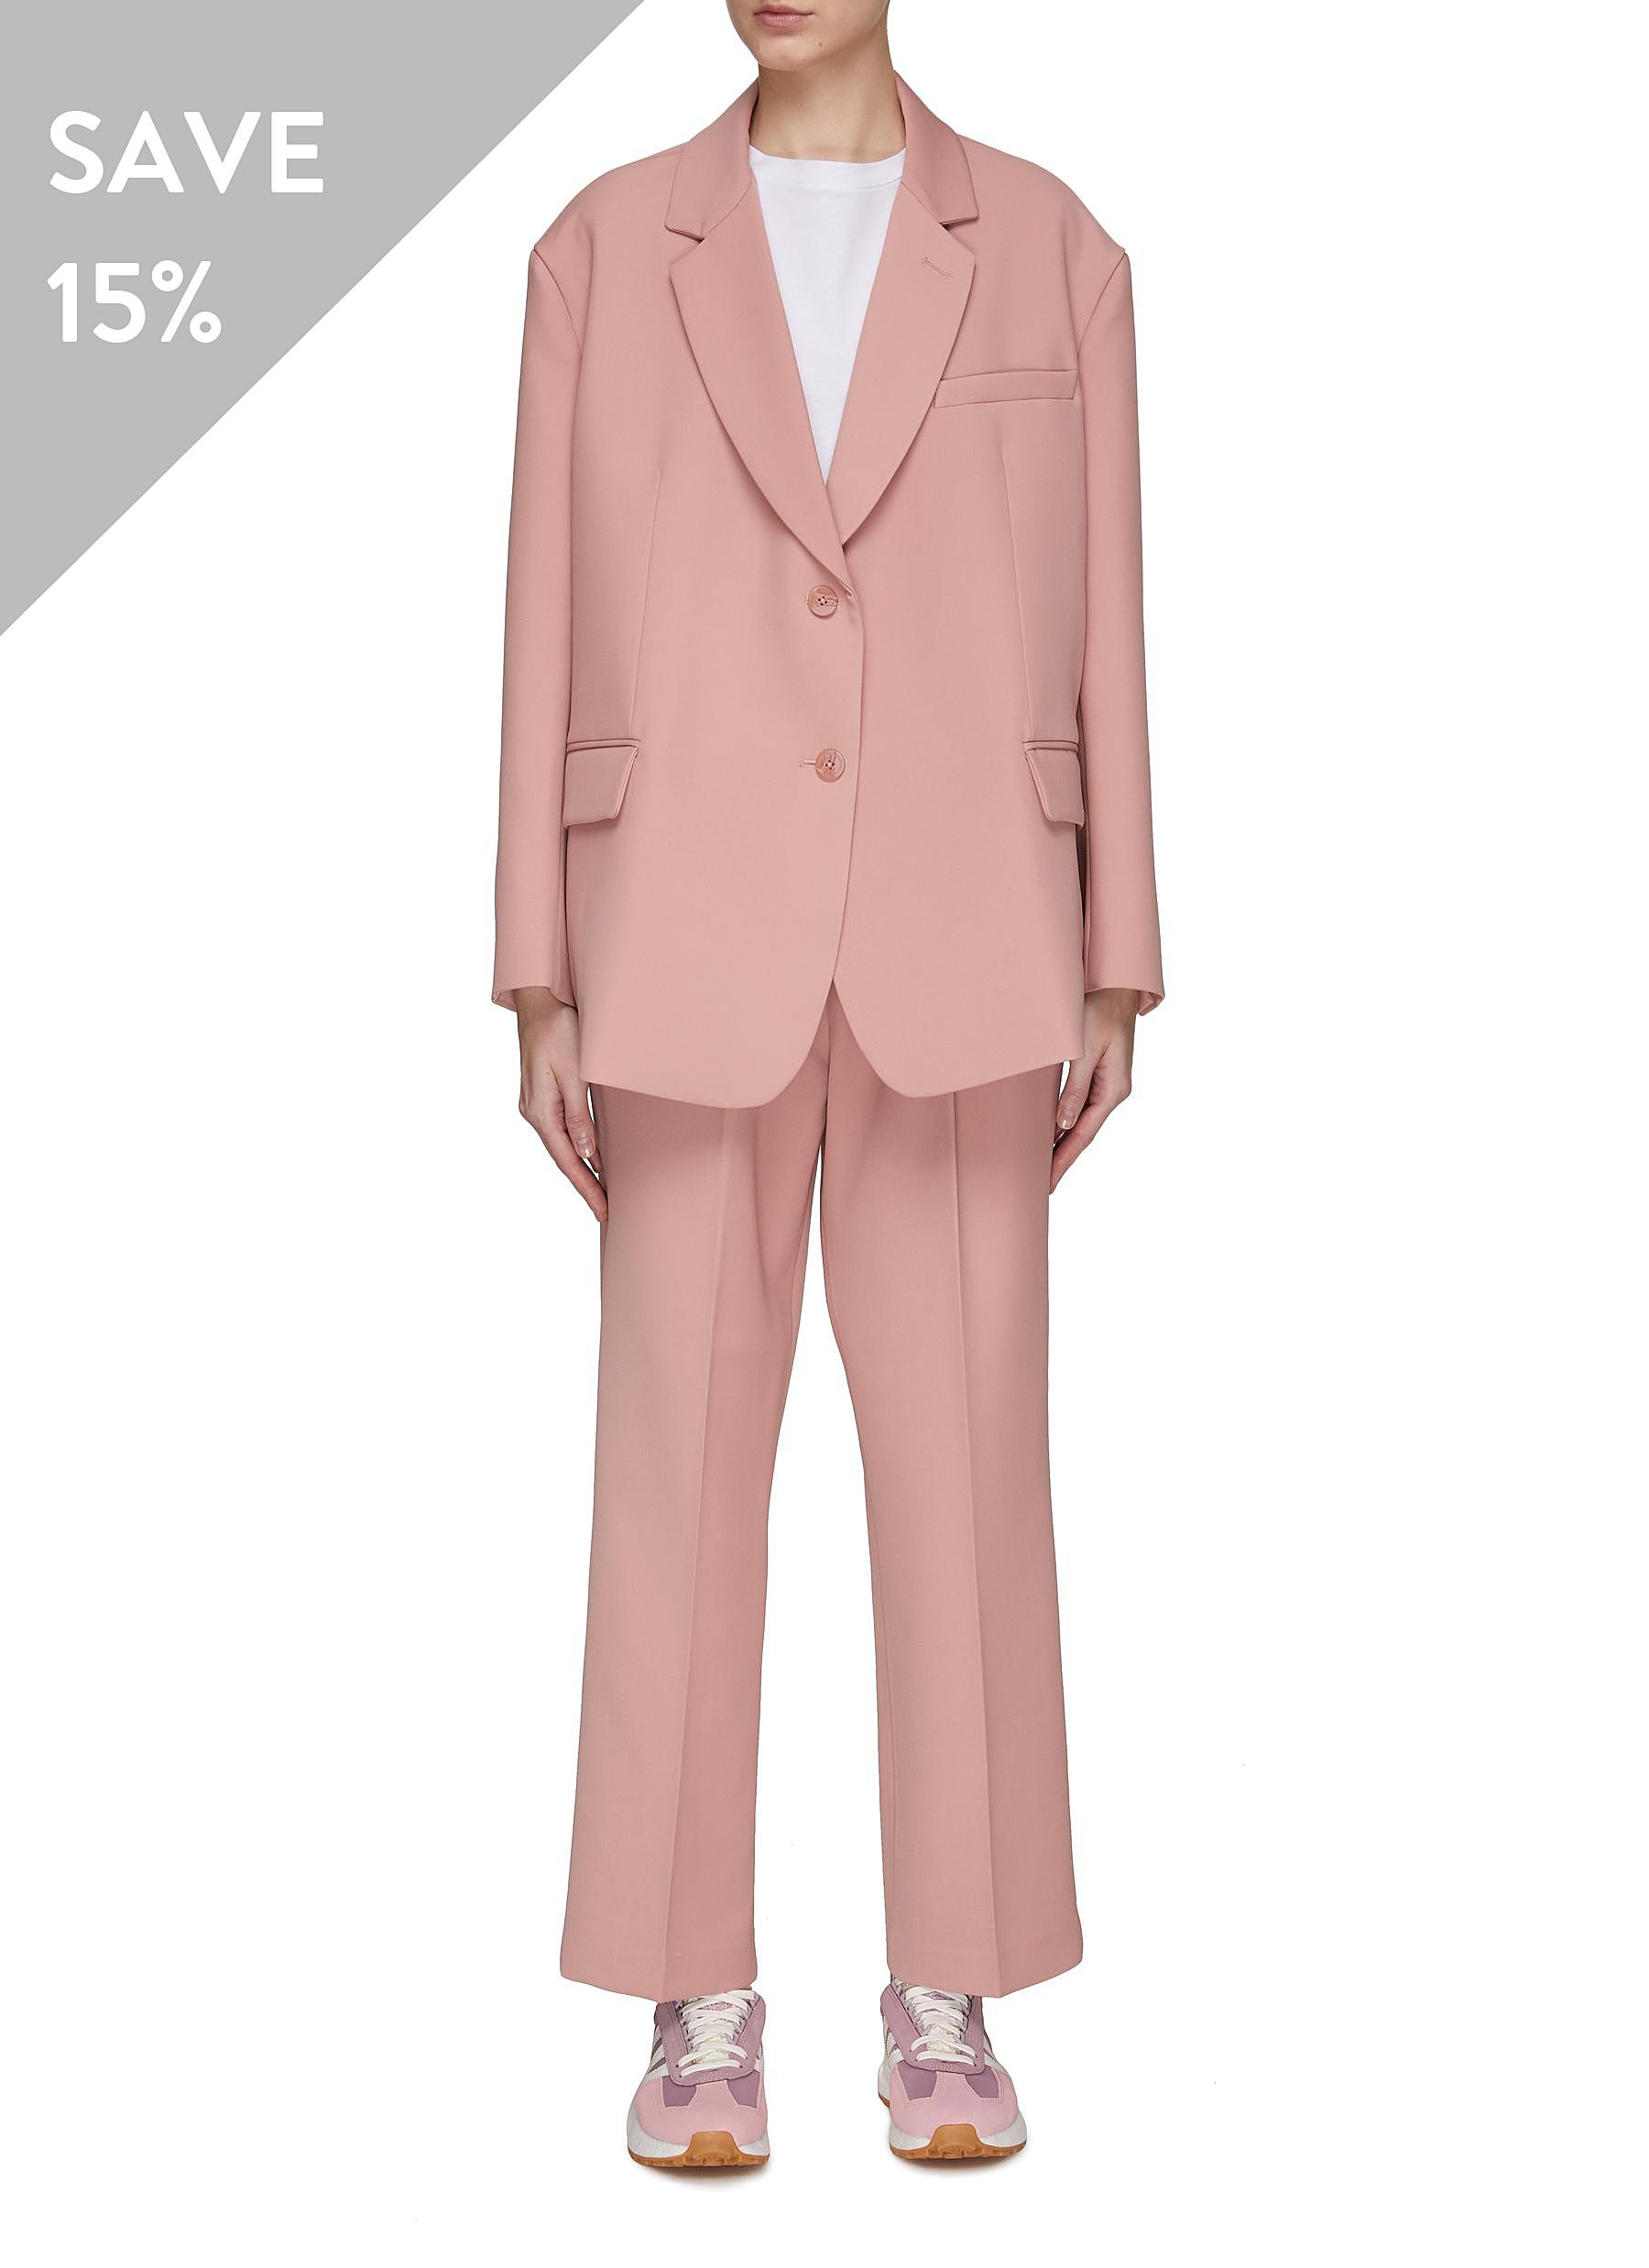 EQUIL TWIN SET PALE PINK SINGLE-BREASTED BLAZER & PANTS